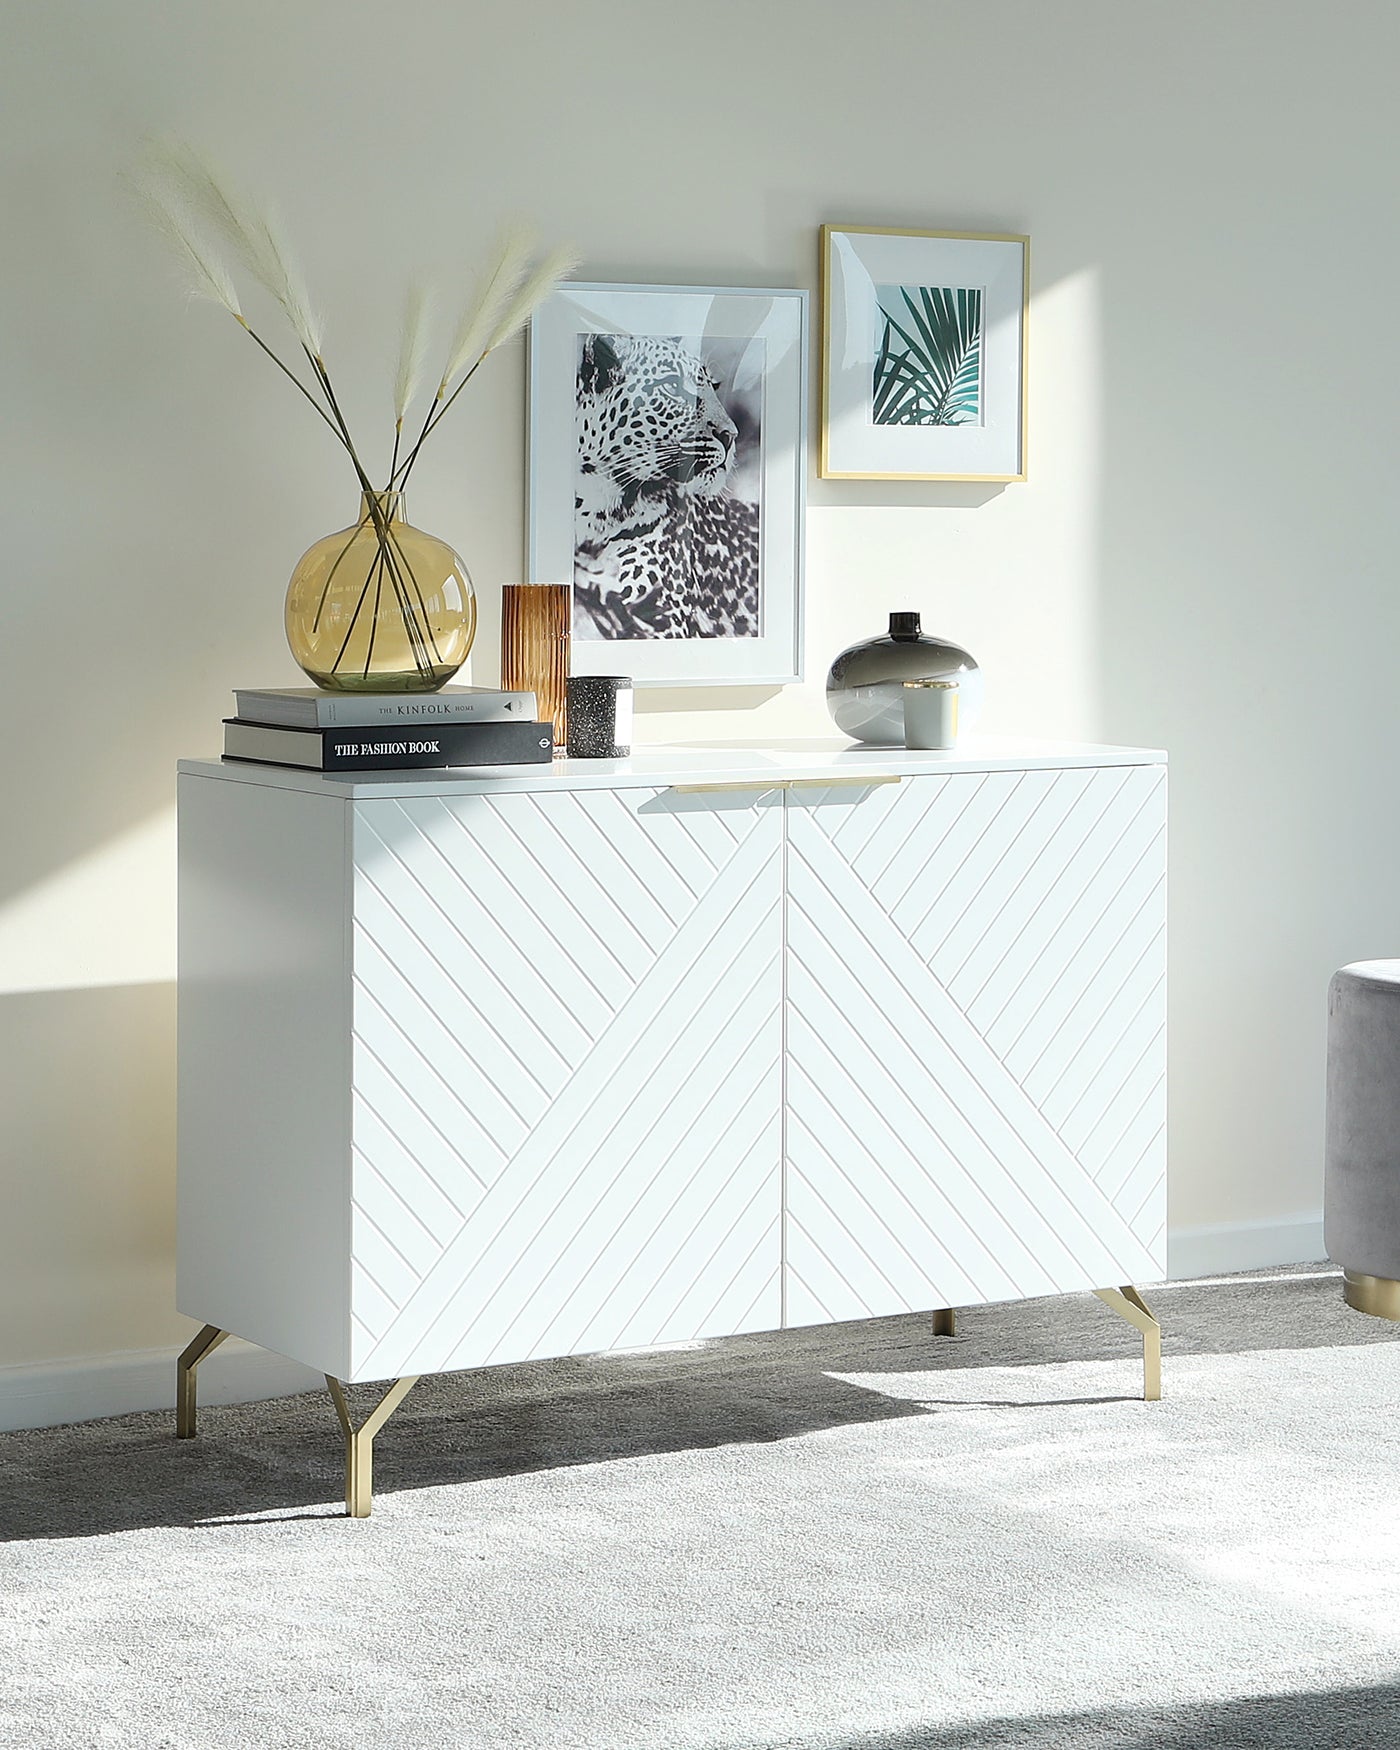 Modern white sideboard with geometric-patterned front panels and gold-coloured metal legs, positioned against a light-coloured wall on a grey area rug.